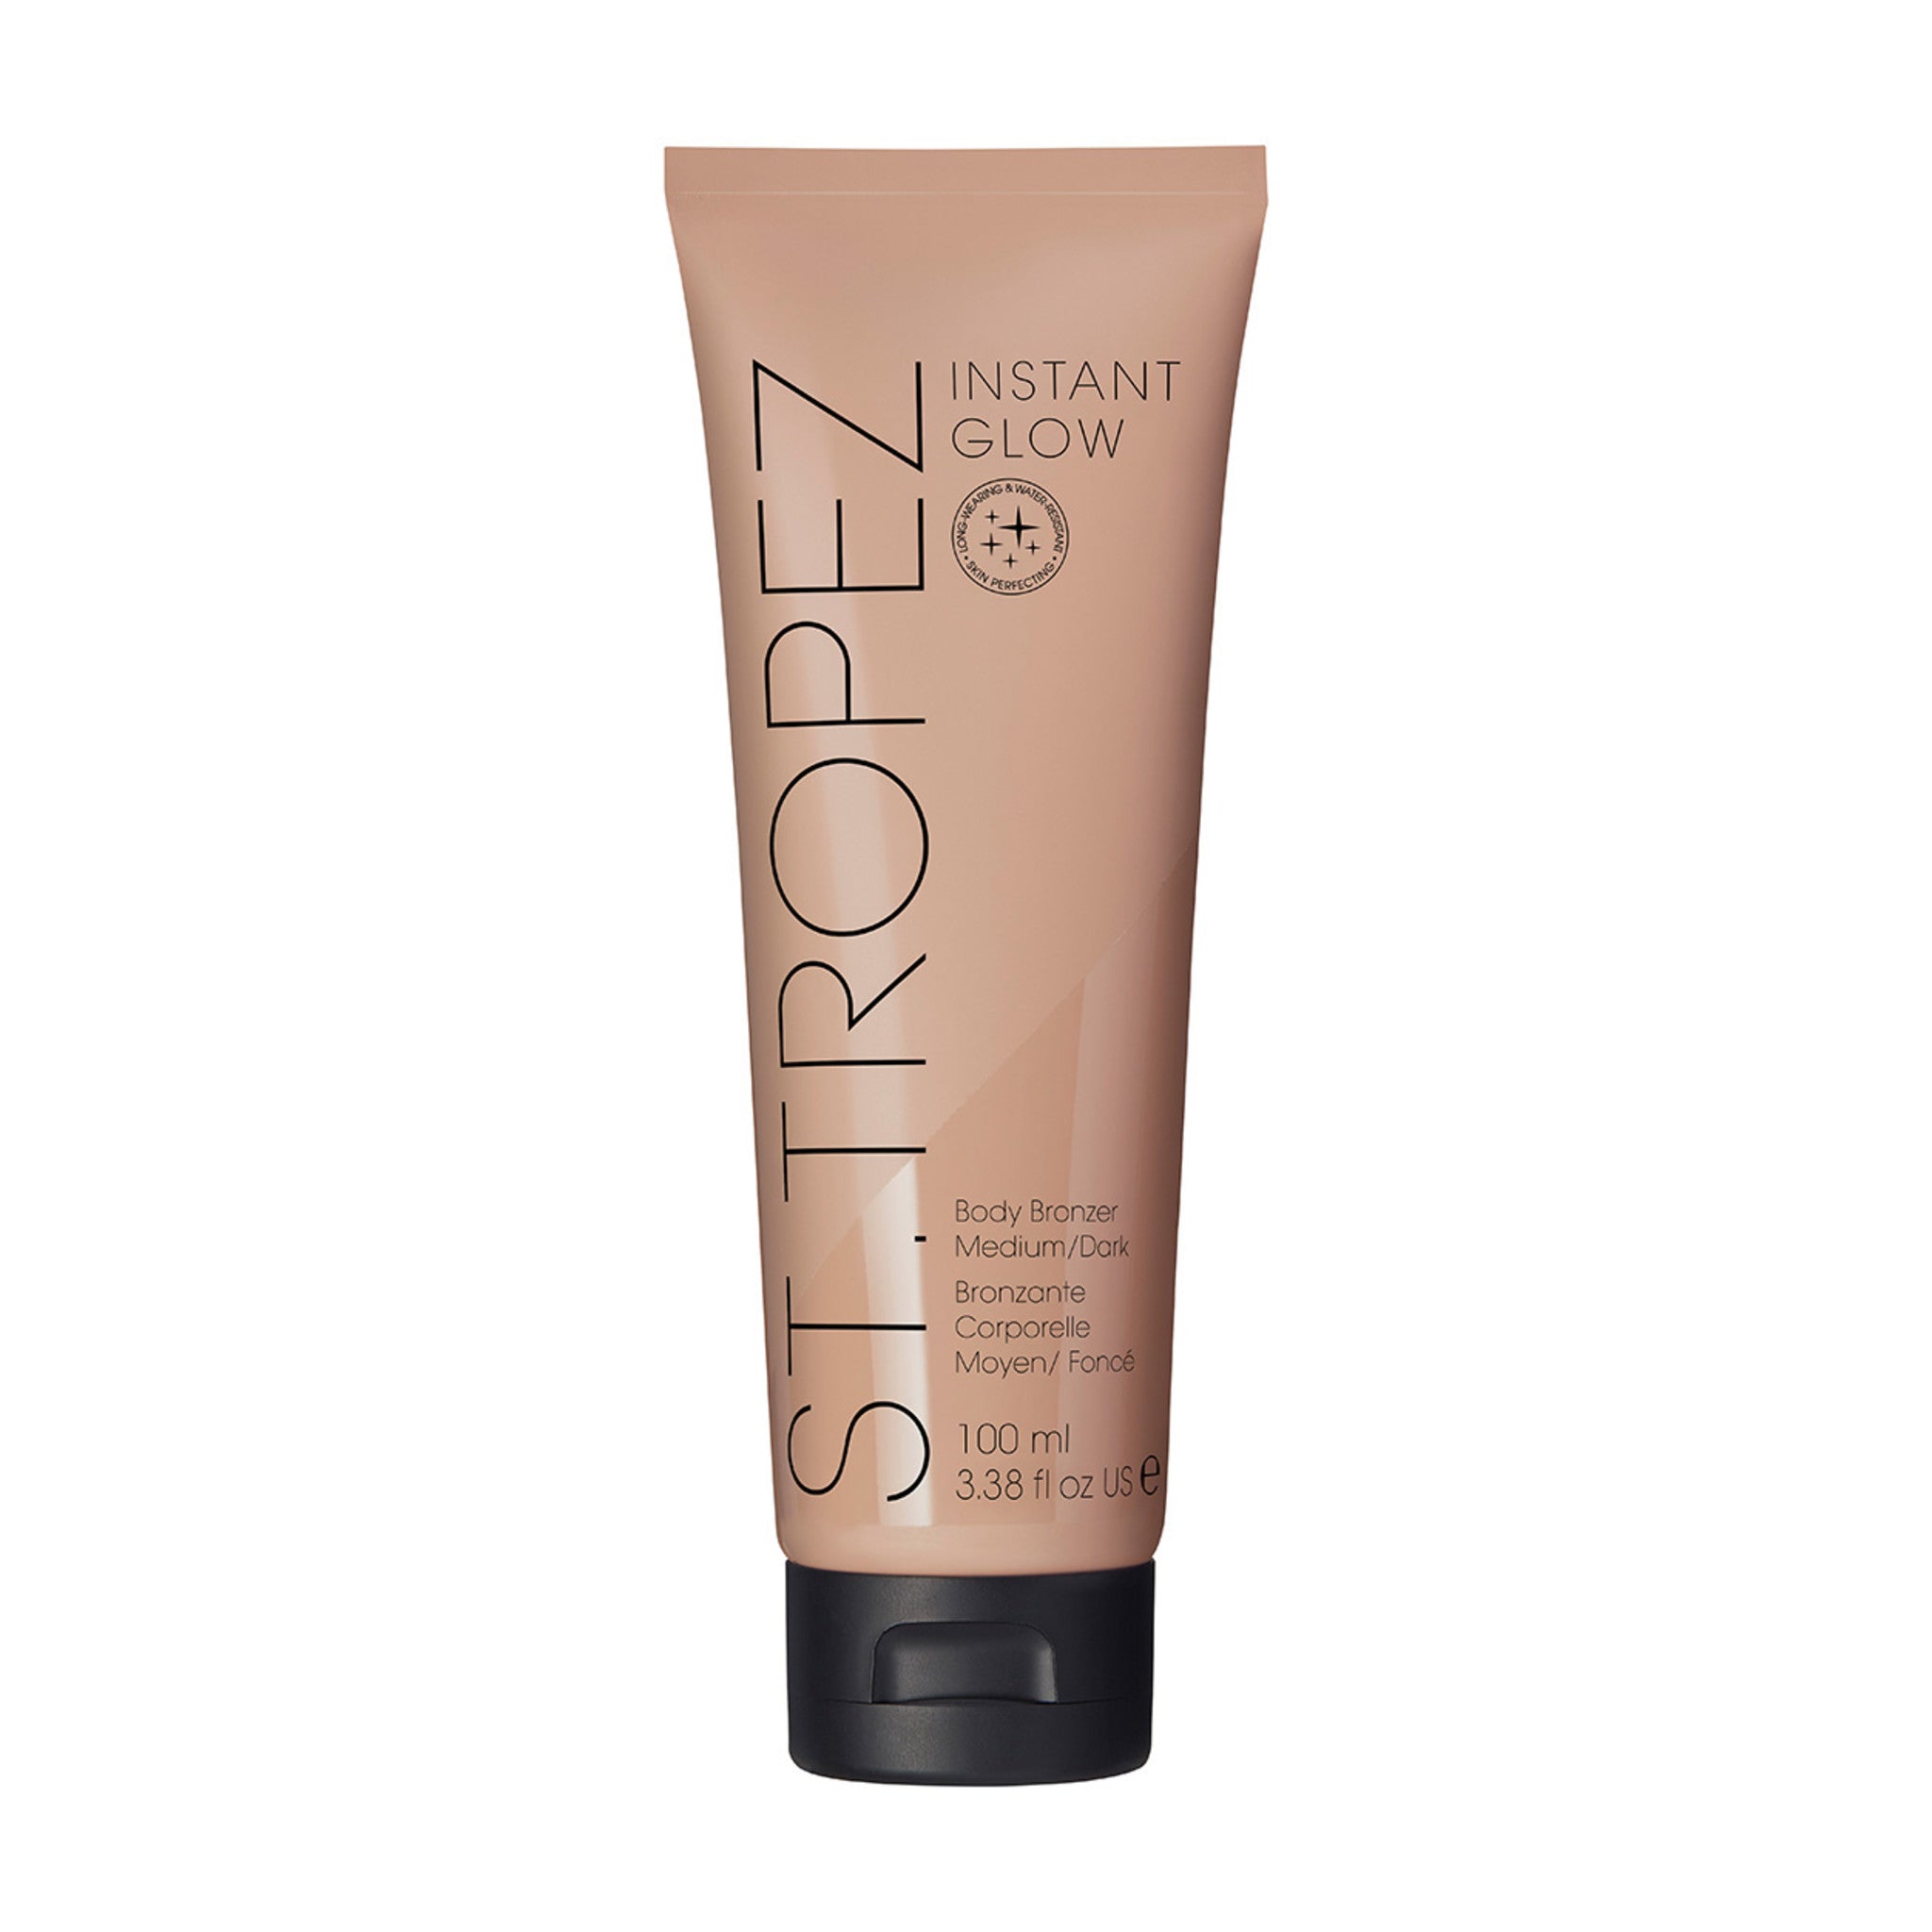 St. Tropez Instant Glow Face & Body Bronzer Color/Shade variant: Medium/Deep main image.